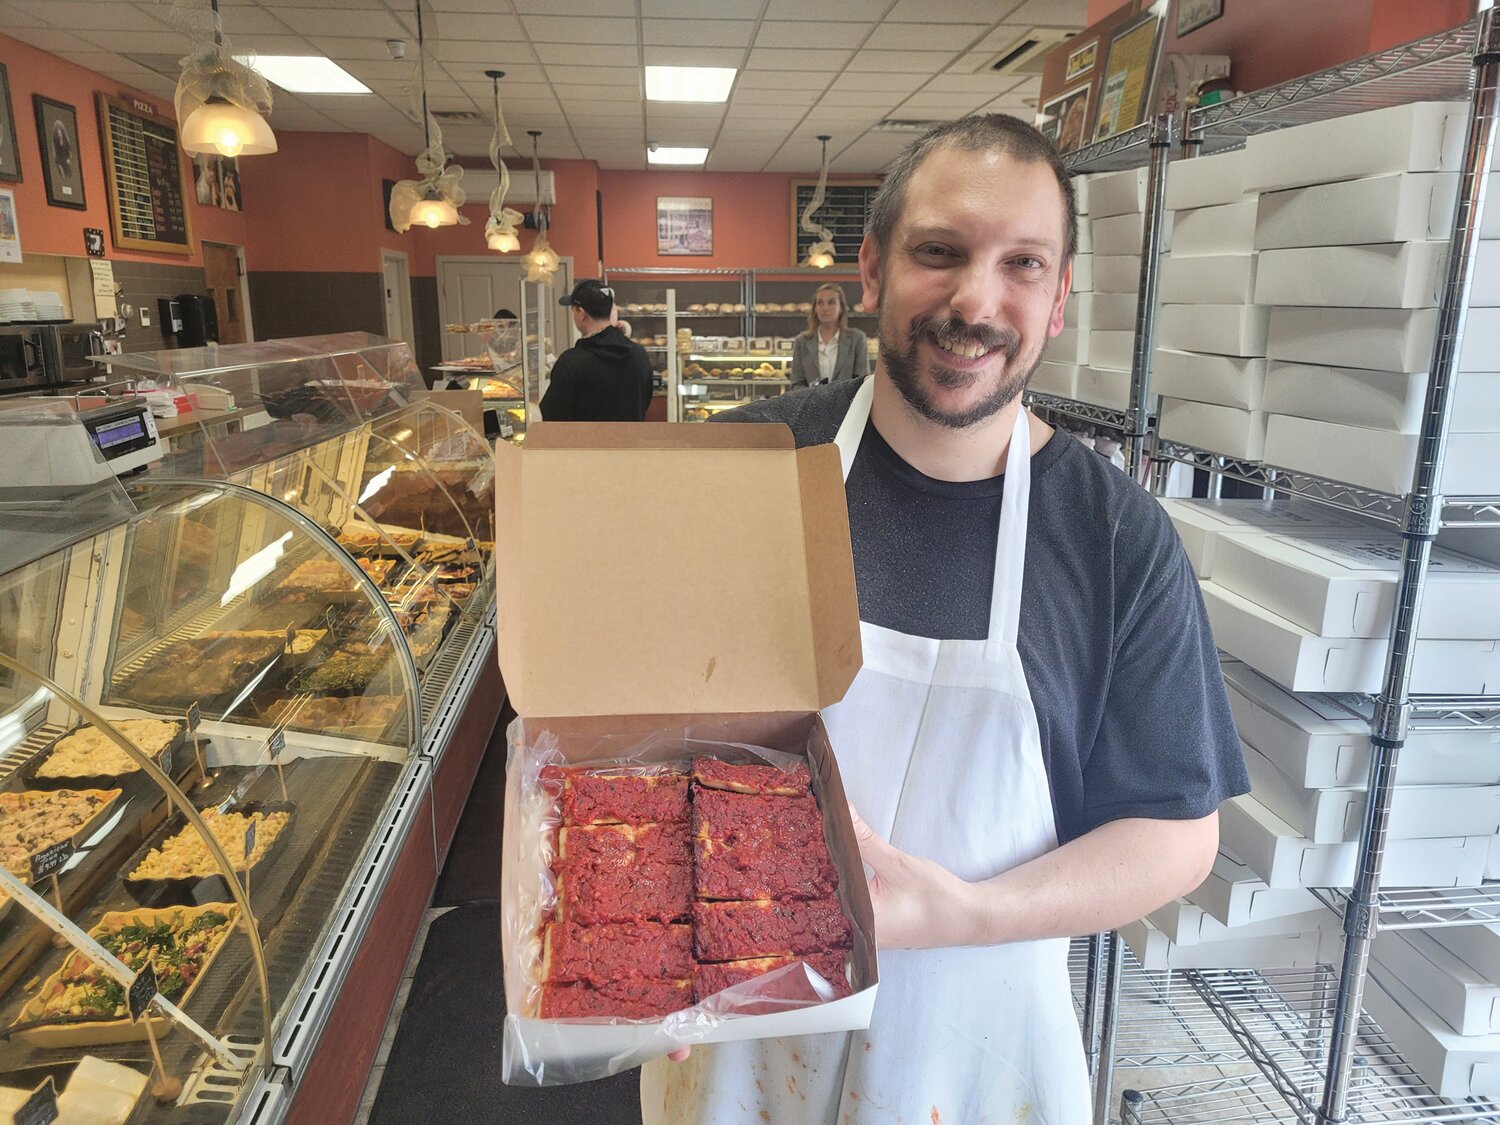 ACQUIRED TASTE: Eric Palmieri, of D. Palmieri’s Bakery in Johnston, holds a box of the shop’s famous pizza strips. Although one famous pizza reviewer said they’re not “his thing,” if you grew up in the Ocean State, chances are  you’ve got strong opinions regarding which bakery serves the best little rectangles. (Beacon Communications photo by Rory Schuler)